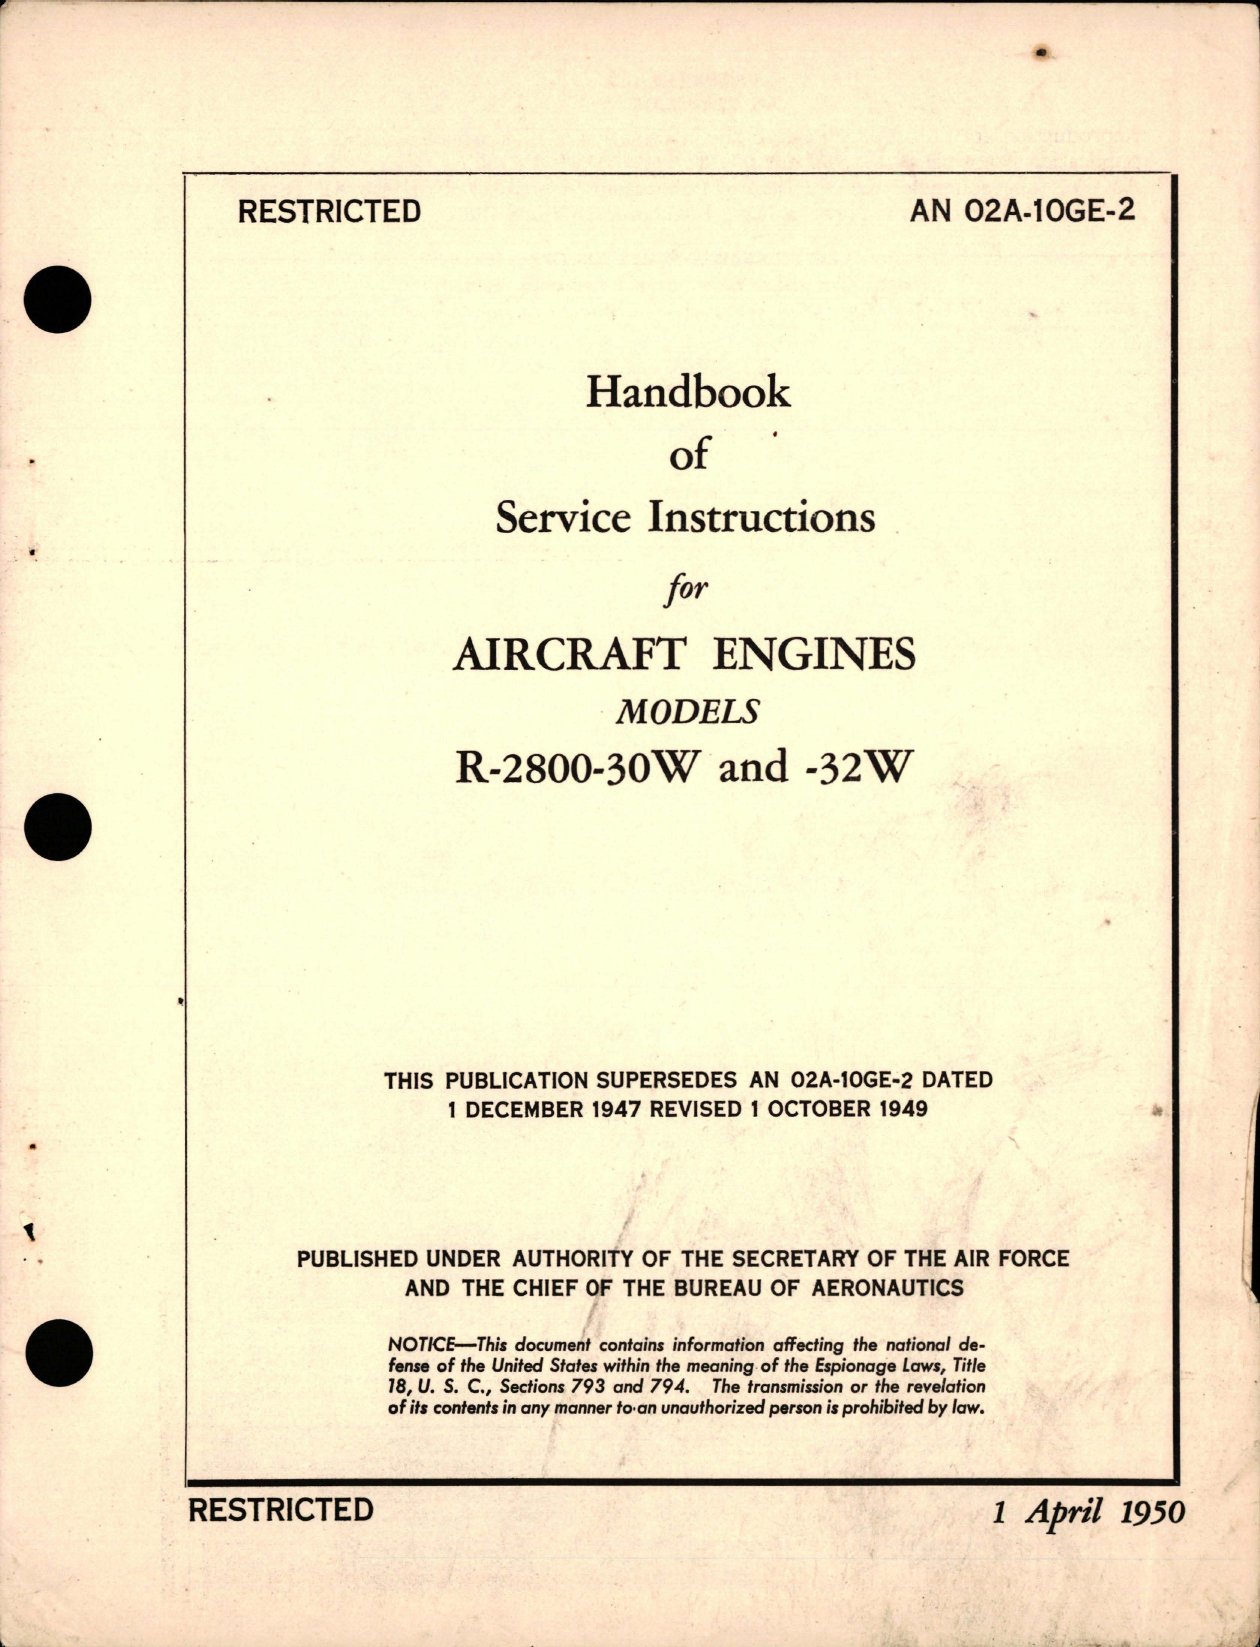 Sample page 1 from AirCorps Library document: Service Instructions for Aircraft Engines - Models R-2800-30W and R-2800-32W